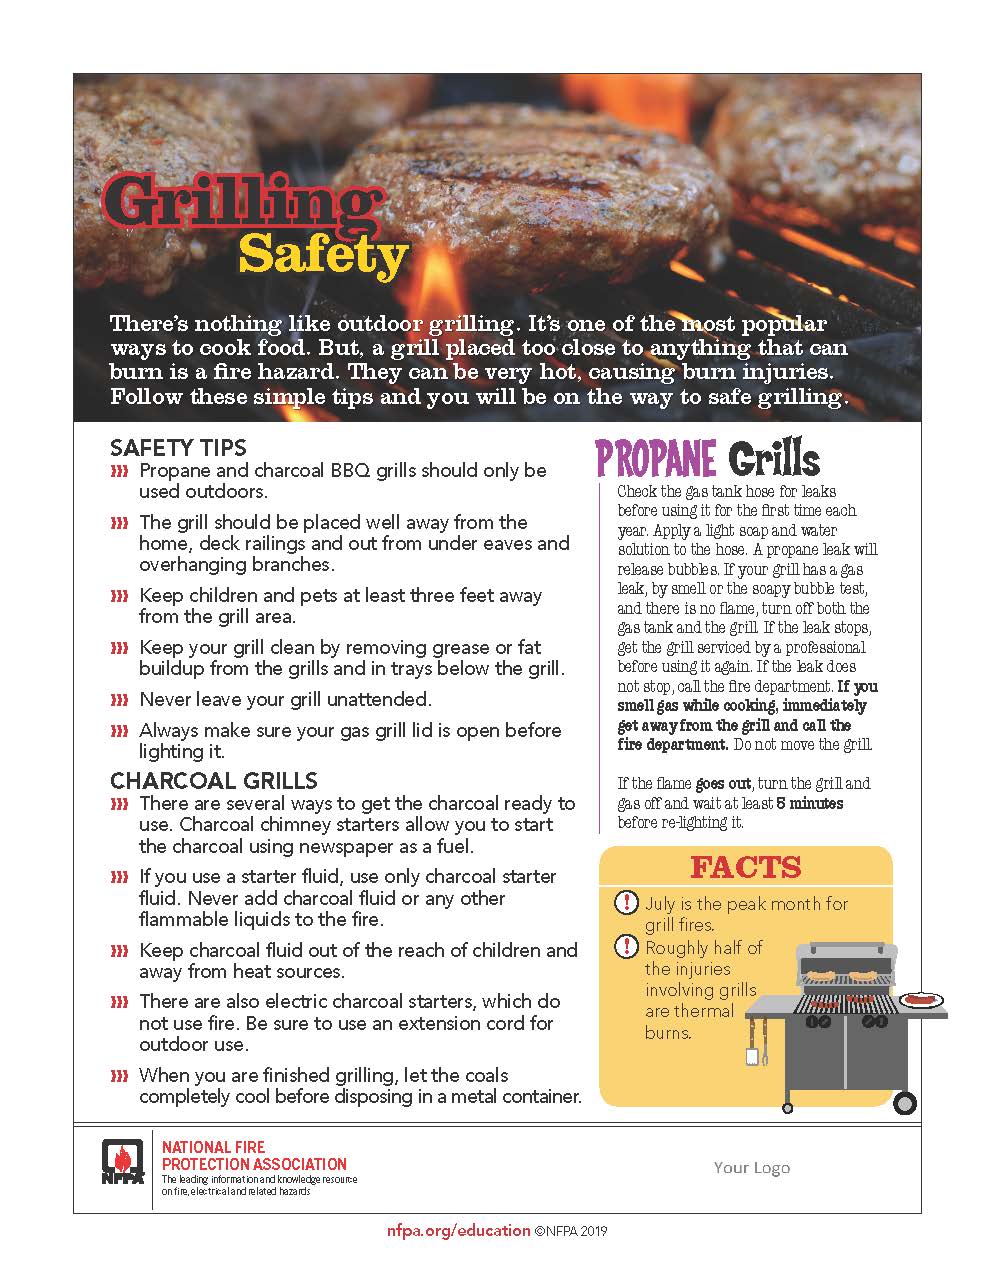 Grilling Safety Tips